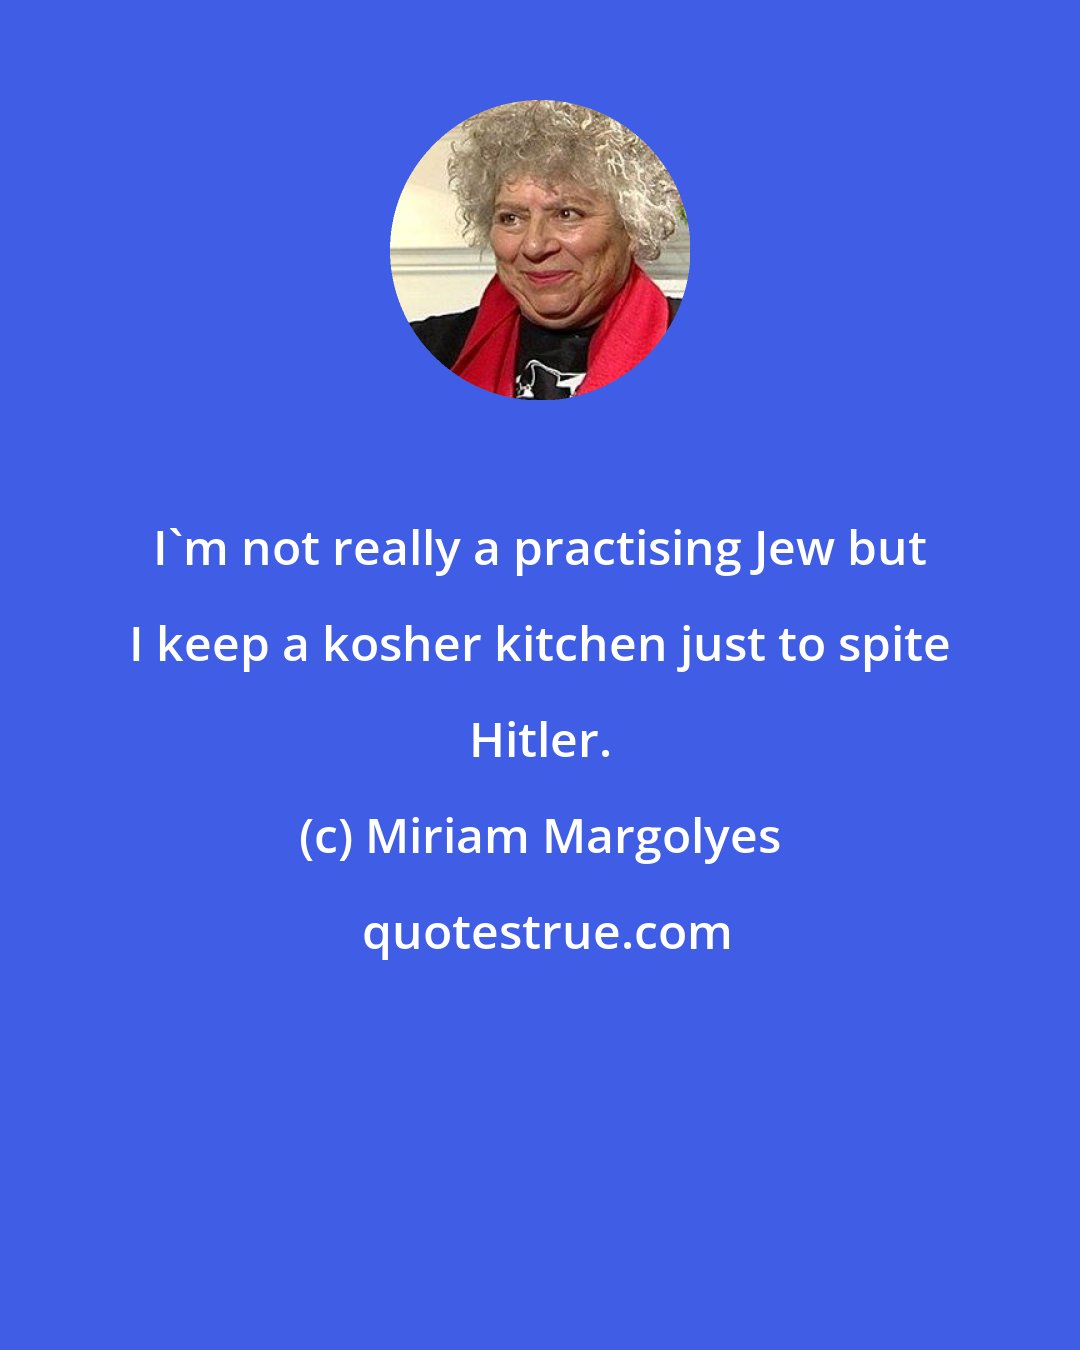 Miriam Margolyes: I'm not really a practising Jew but I keep a kosher kitchen just to spite Hitler.